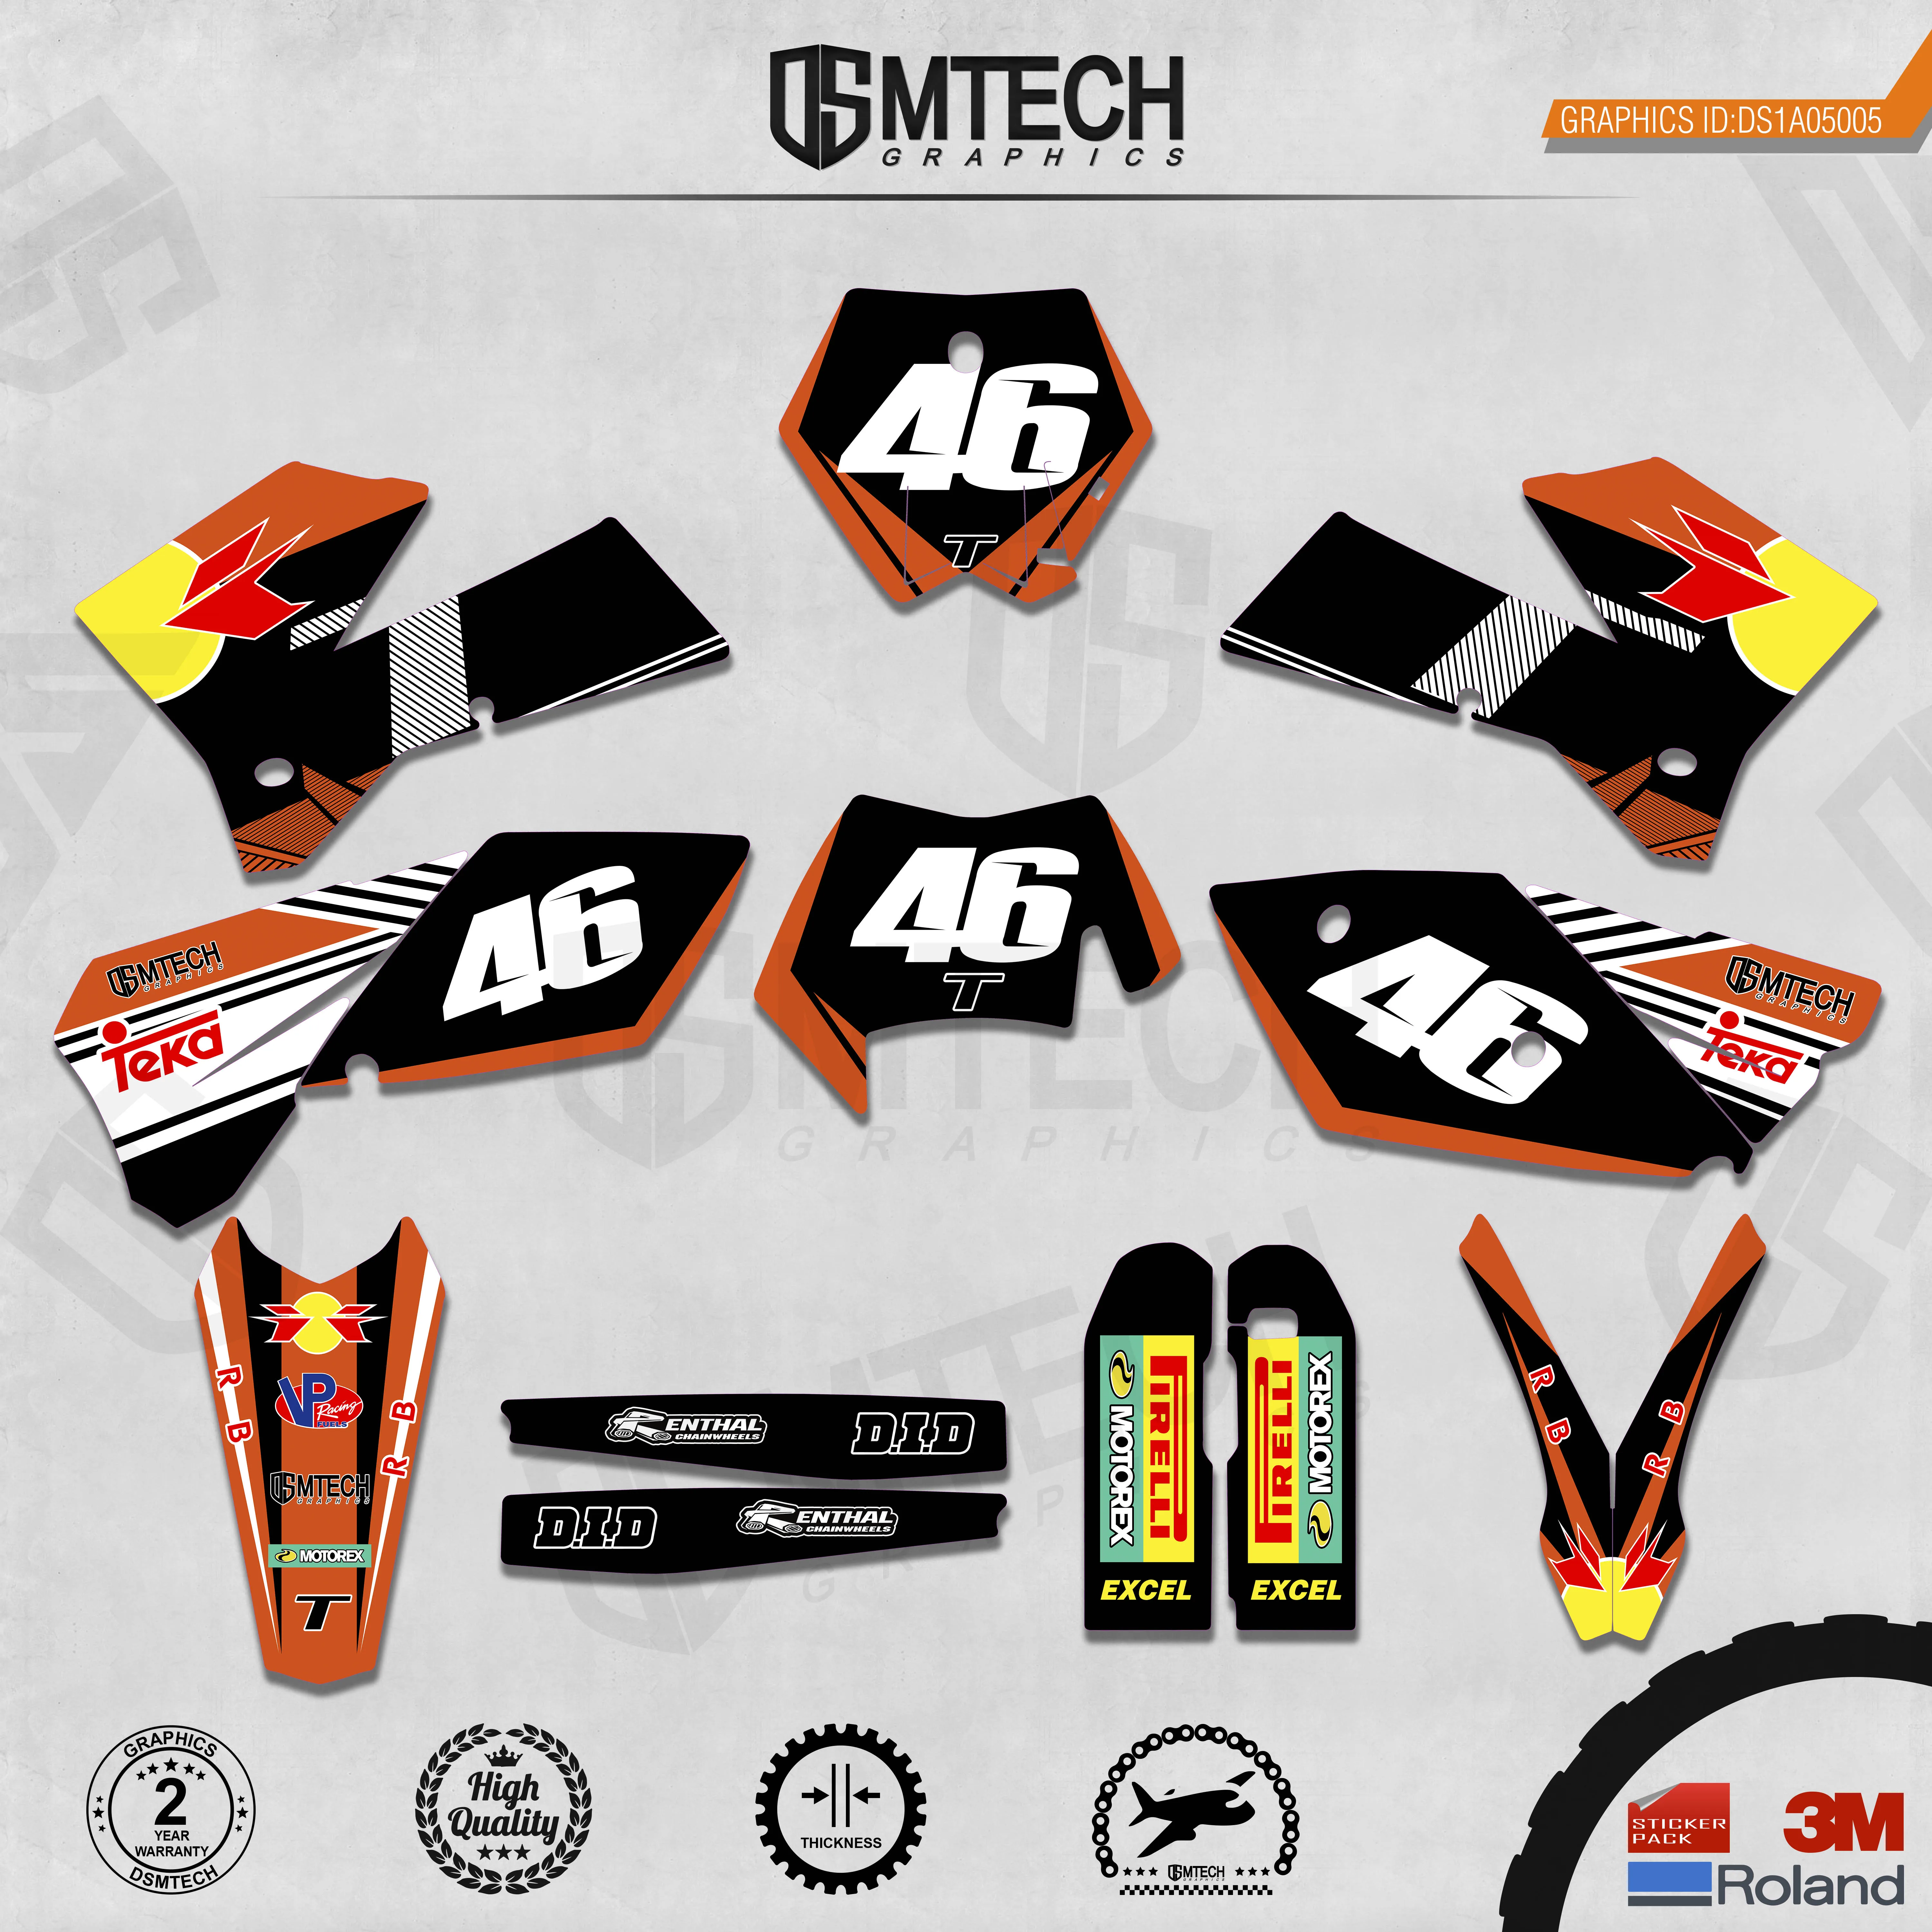 DSMTECH Customized Team Graphics Backgrounds Decals 3M Custom Stickers For 05-06SXF 06-07XCF 05-07EXC 06-07XCW  005